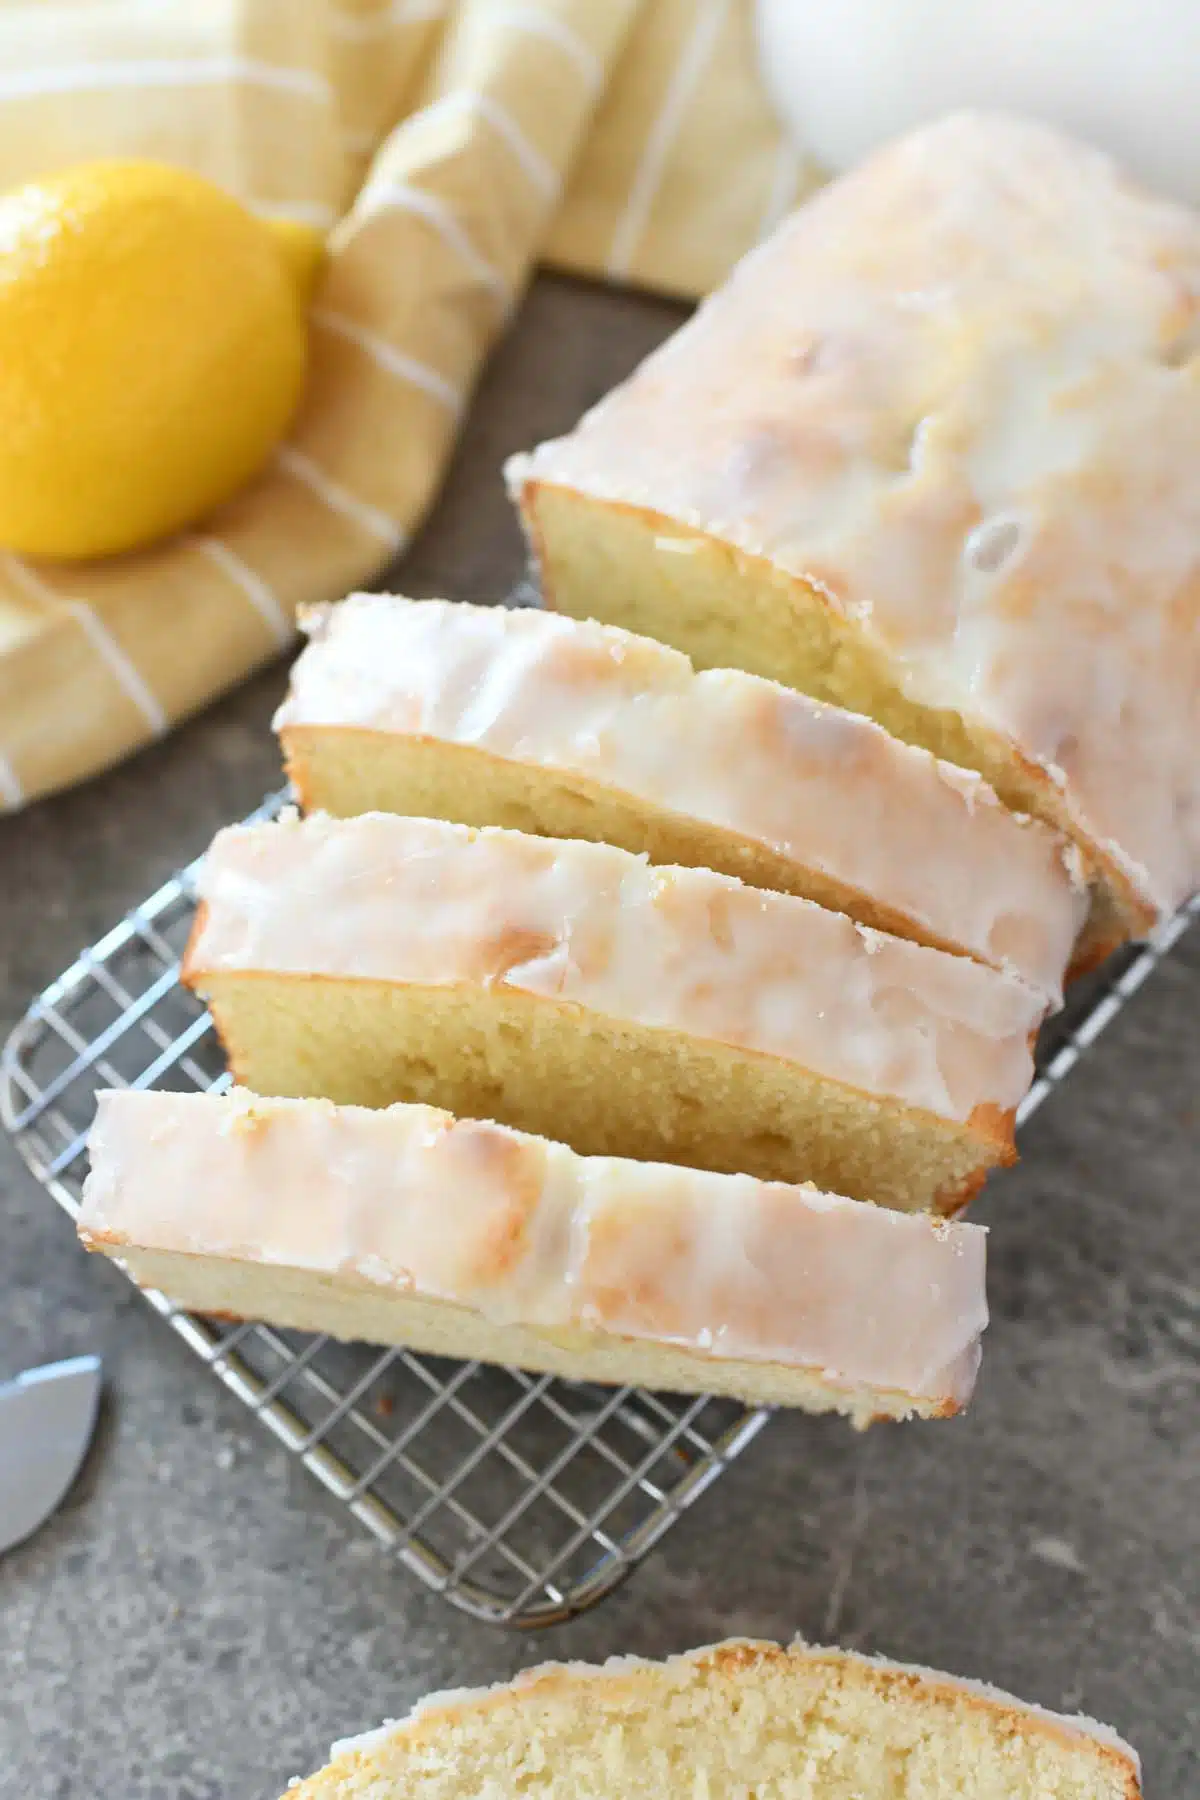 Iced Lemon Pound Cake Recipe. Sliced lemon pound cake is on a cooling rack with lemon and a yellow striped napkin nearby. 